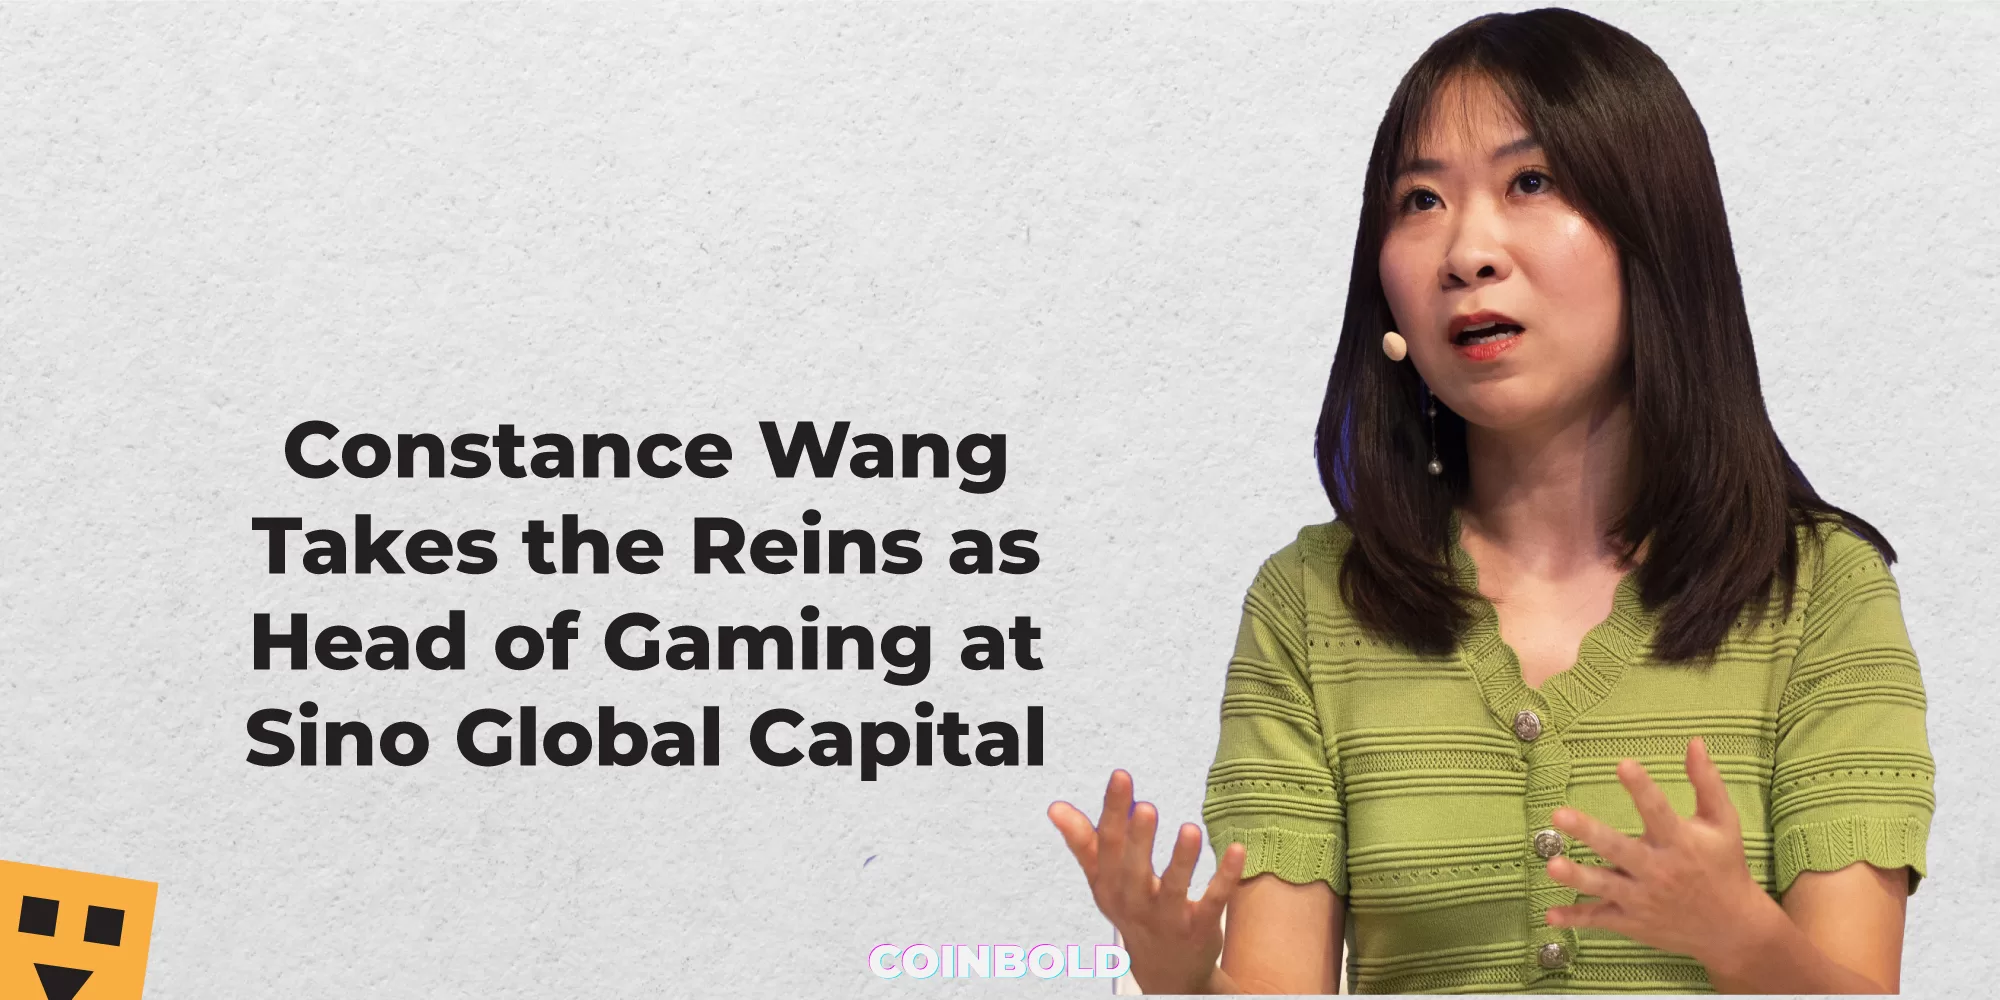 Constance Wang Takes the Reins as Head of Gaming at Sino Global Capital jpg